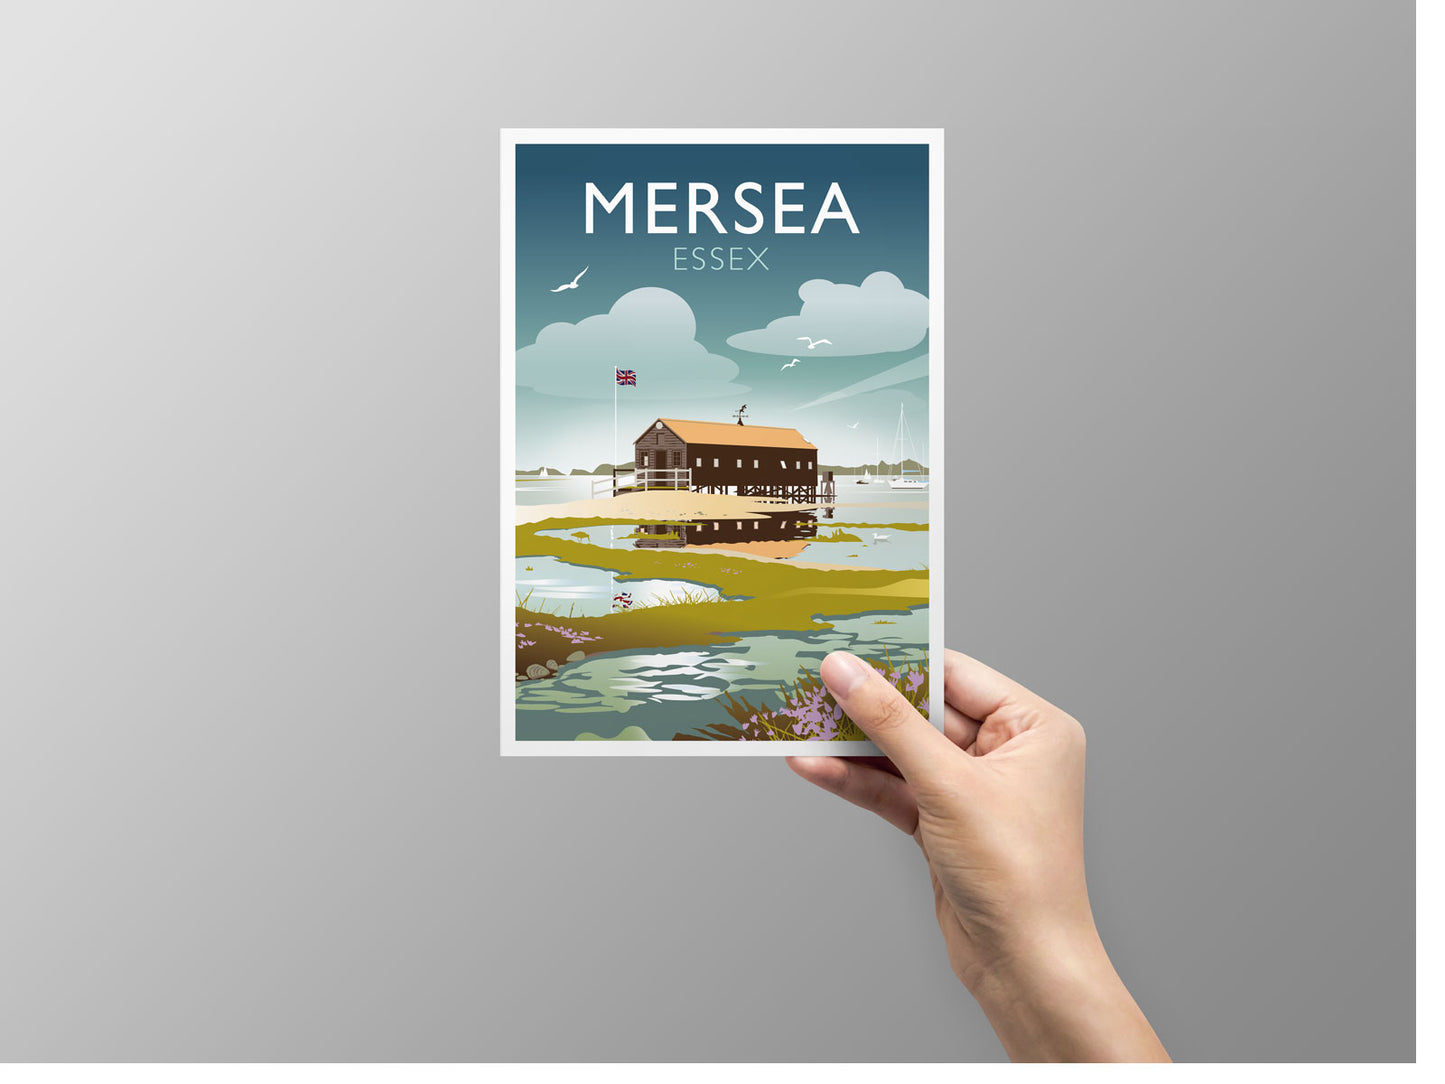 Mersea Packing Shed Greeting Card